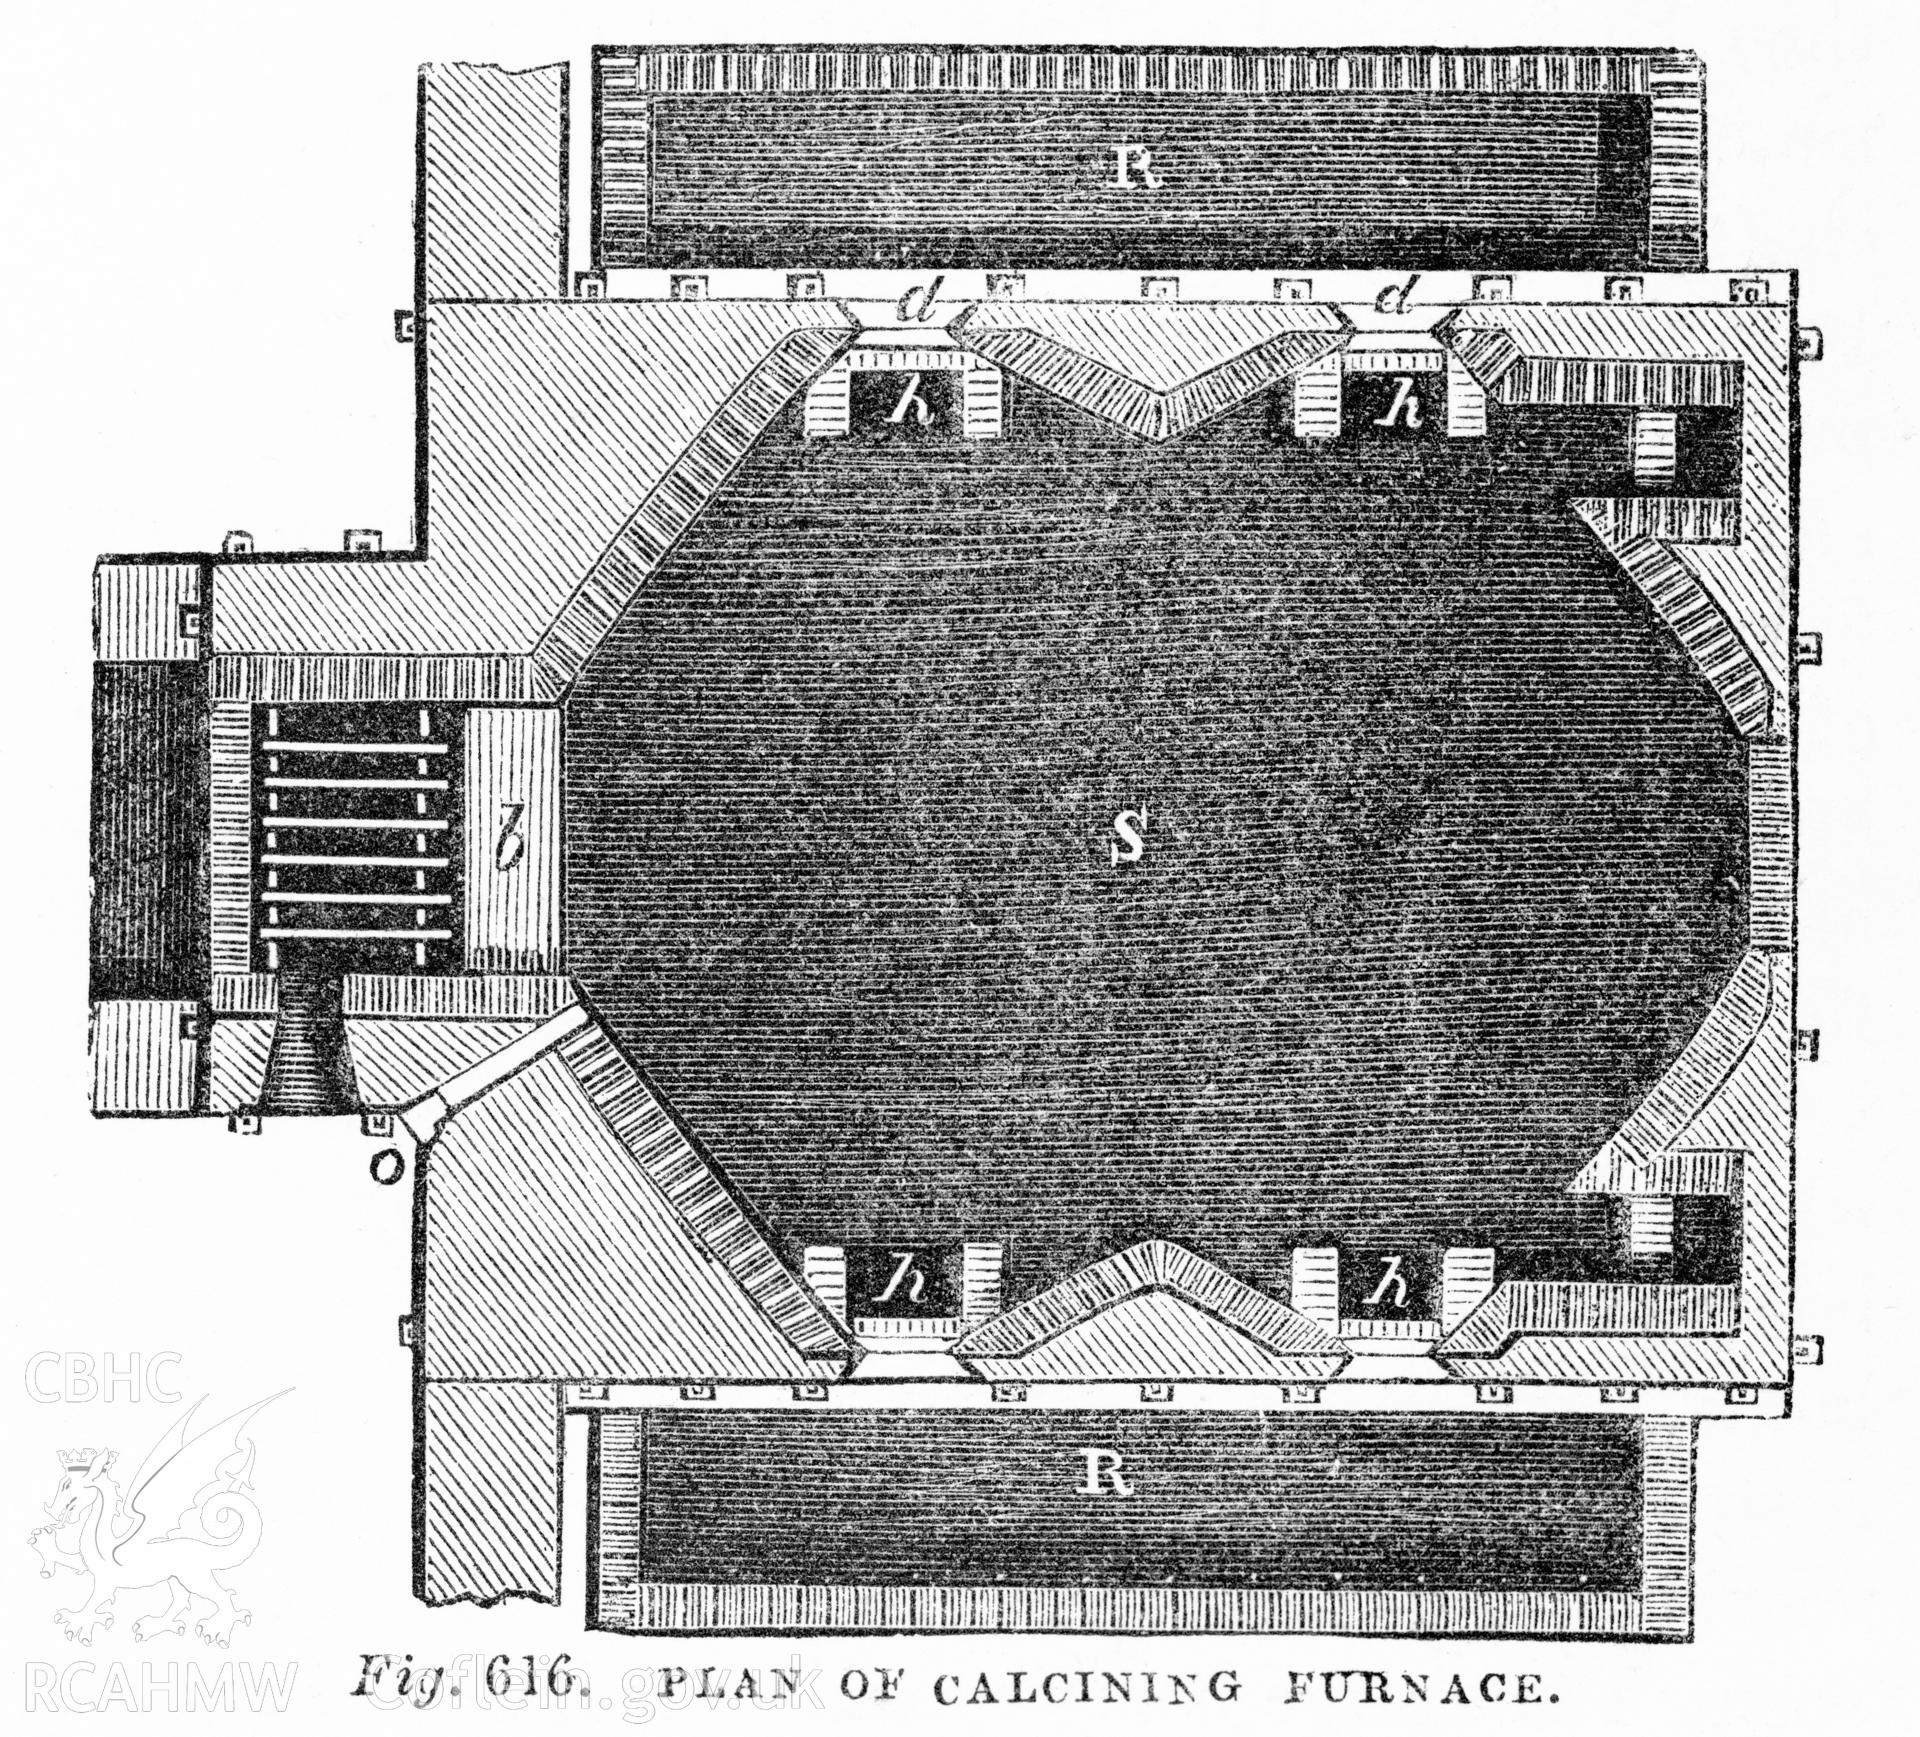 Digitized image of a plan of calcining furnace, as published fig 616 from Tomlinson's 'Cyclopedia of Useful Arts, Manufacturing, Mining and Engineering' Vol I, 1854.